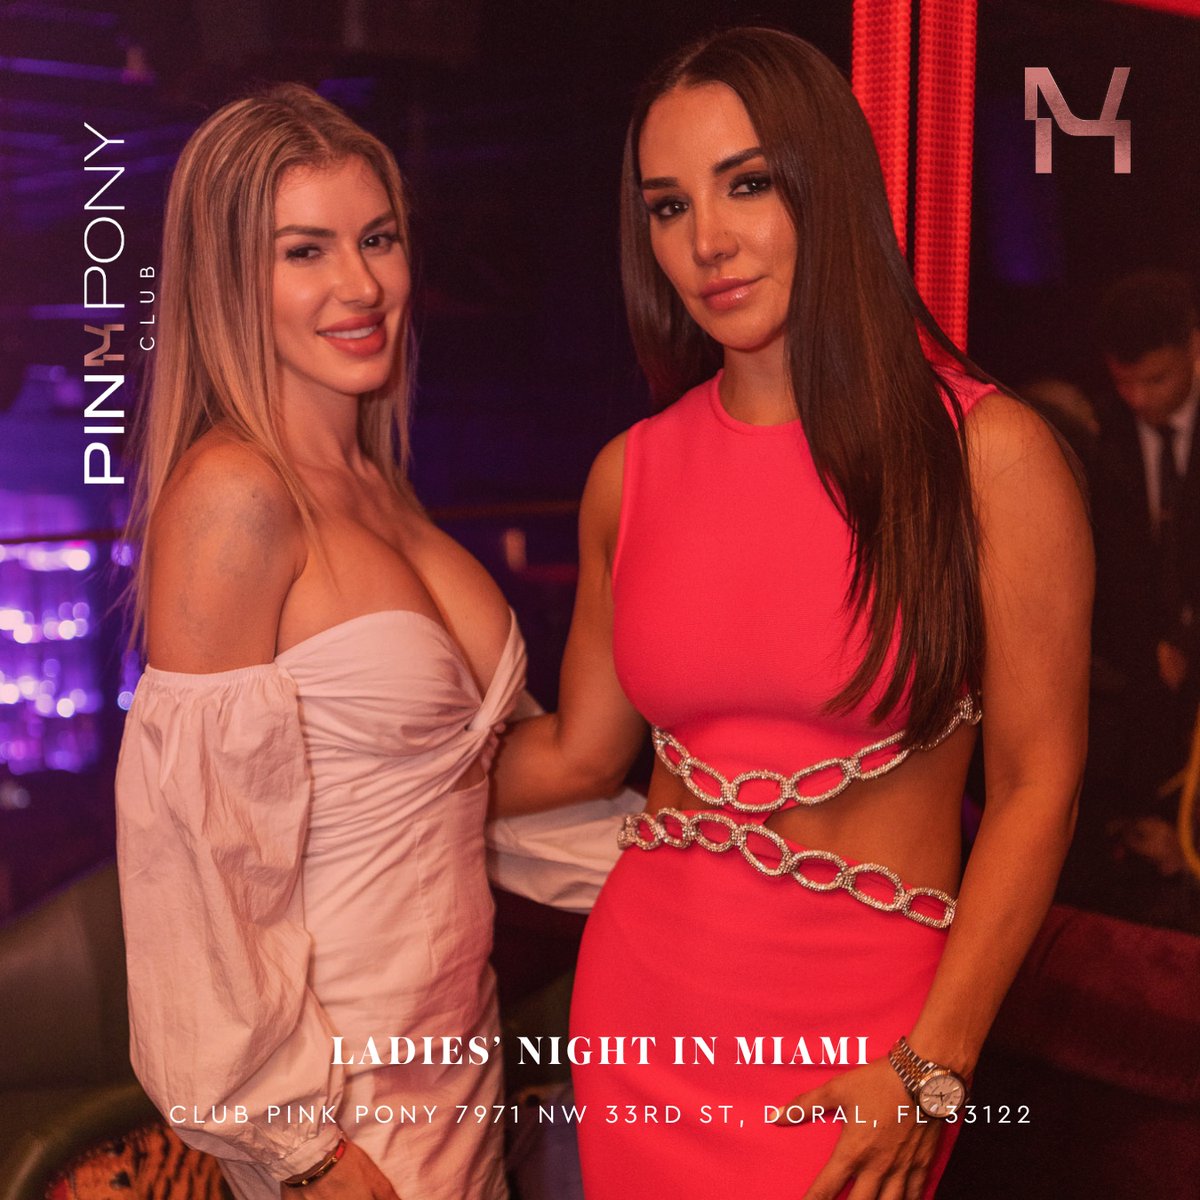 Experience the ultimate girls night out at Club Pink Pony! 🍸🎉🥂

#ClubPinkPony #PinkPony #MiamiNightClub #DoralNightClub #DoralClub #Crypto #miamiclub #miamilounge #miamicrypto #cryptonation #miaminightlife #miamiparty #bachelorparty #groupparties #groomsparty